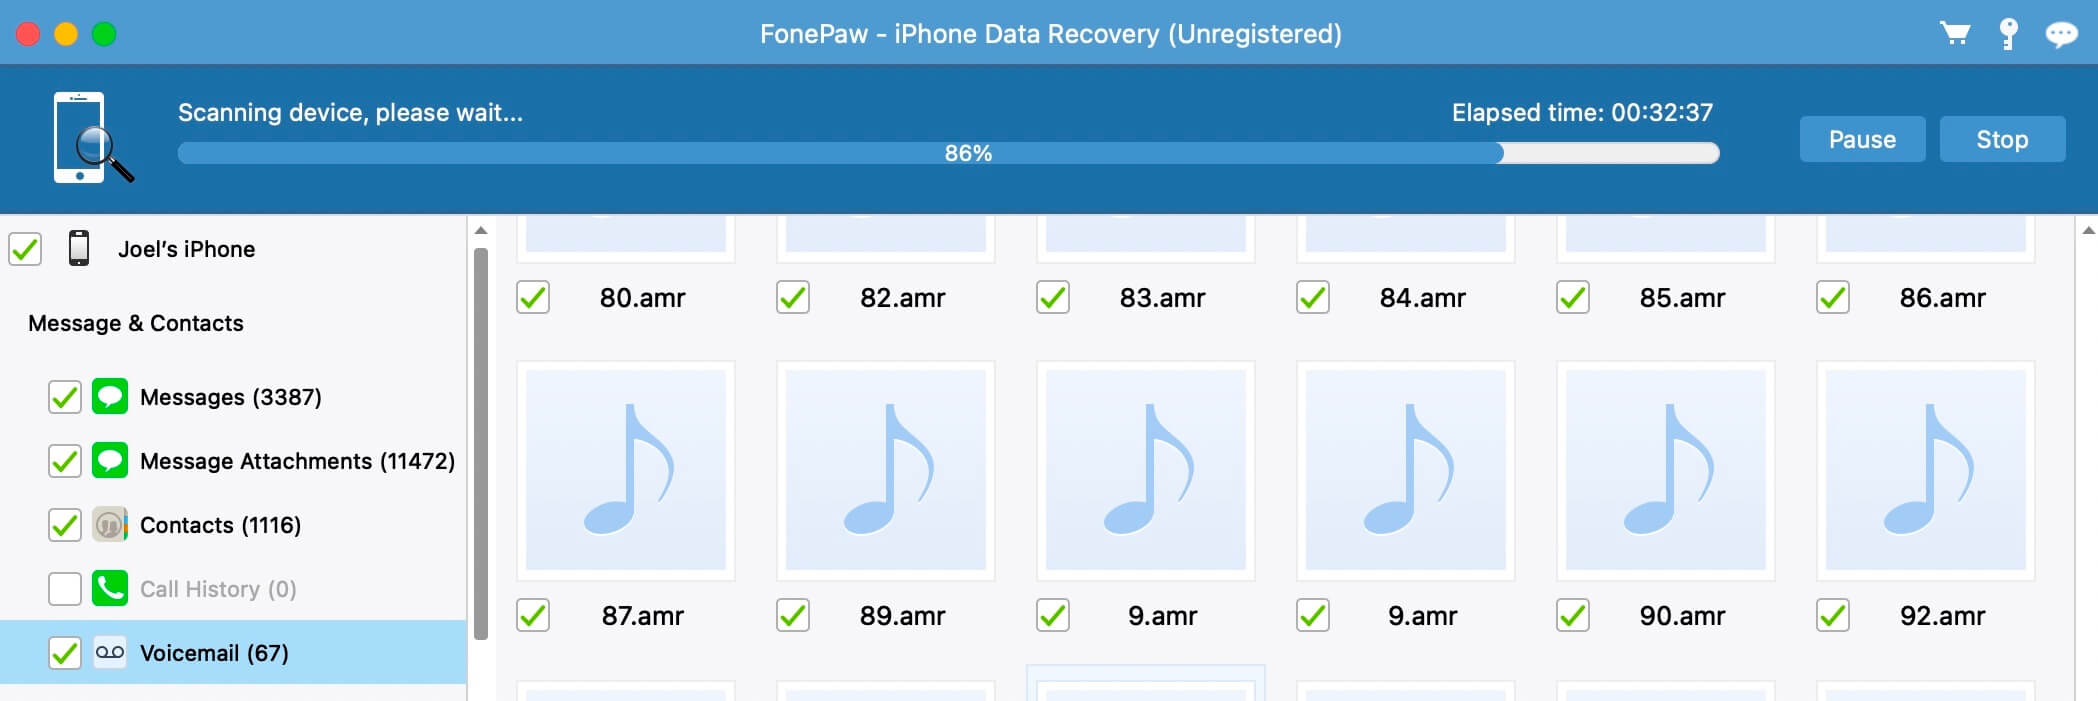 iphone data recovery tool download